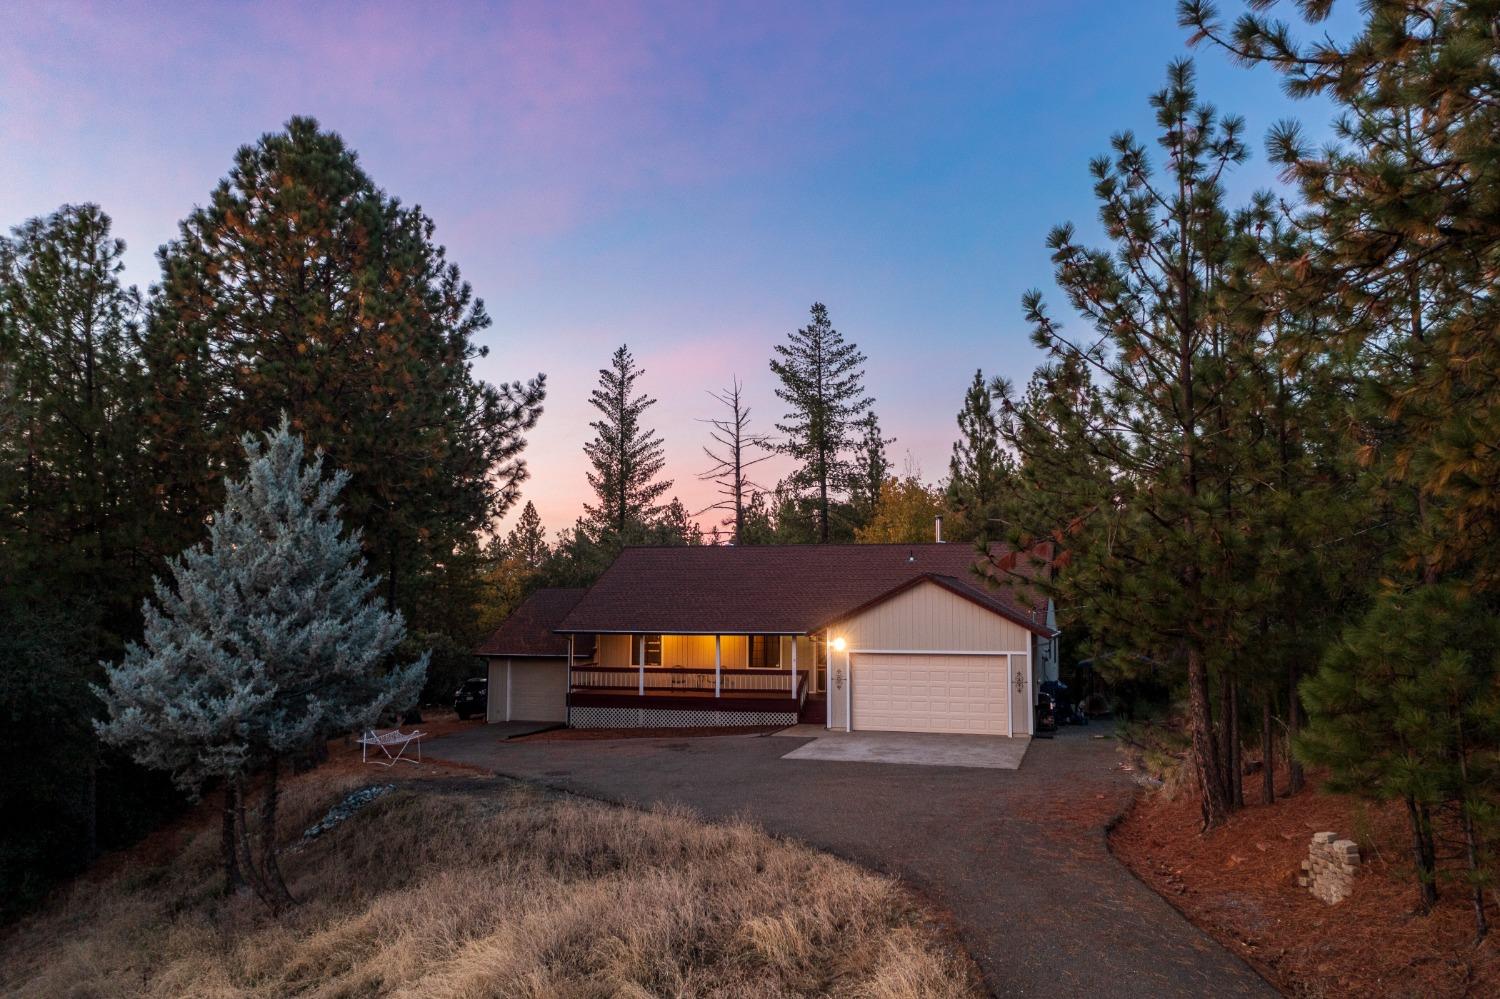 Photo of 5898 Catbird Hill Ln in Placerville, CA